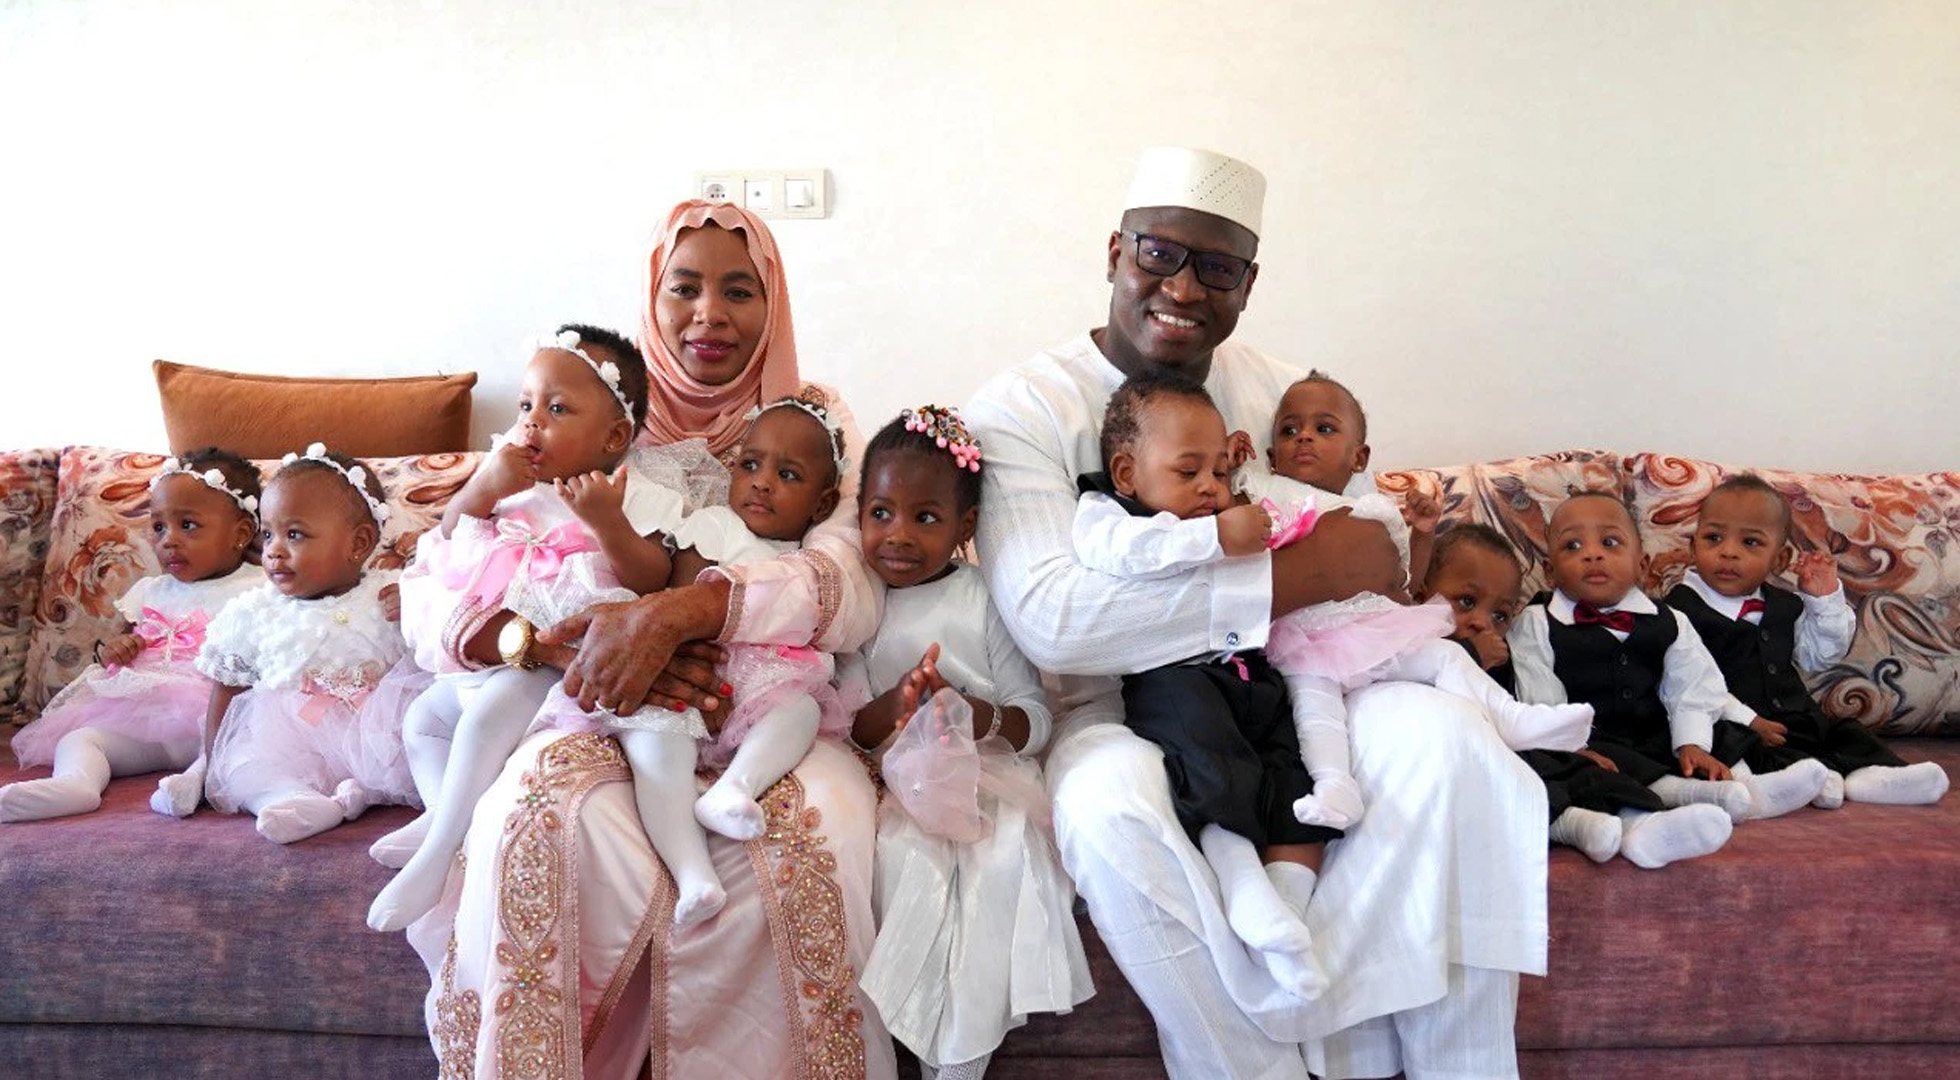 Halima Cisse and Abdelkader Arby proudly pose for a photo with their children on their 1st birthday